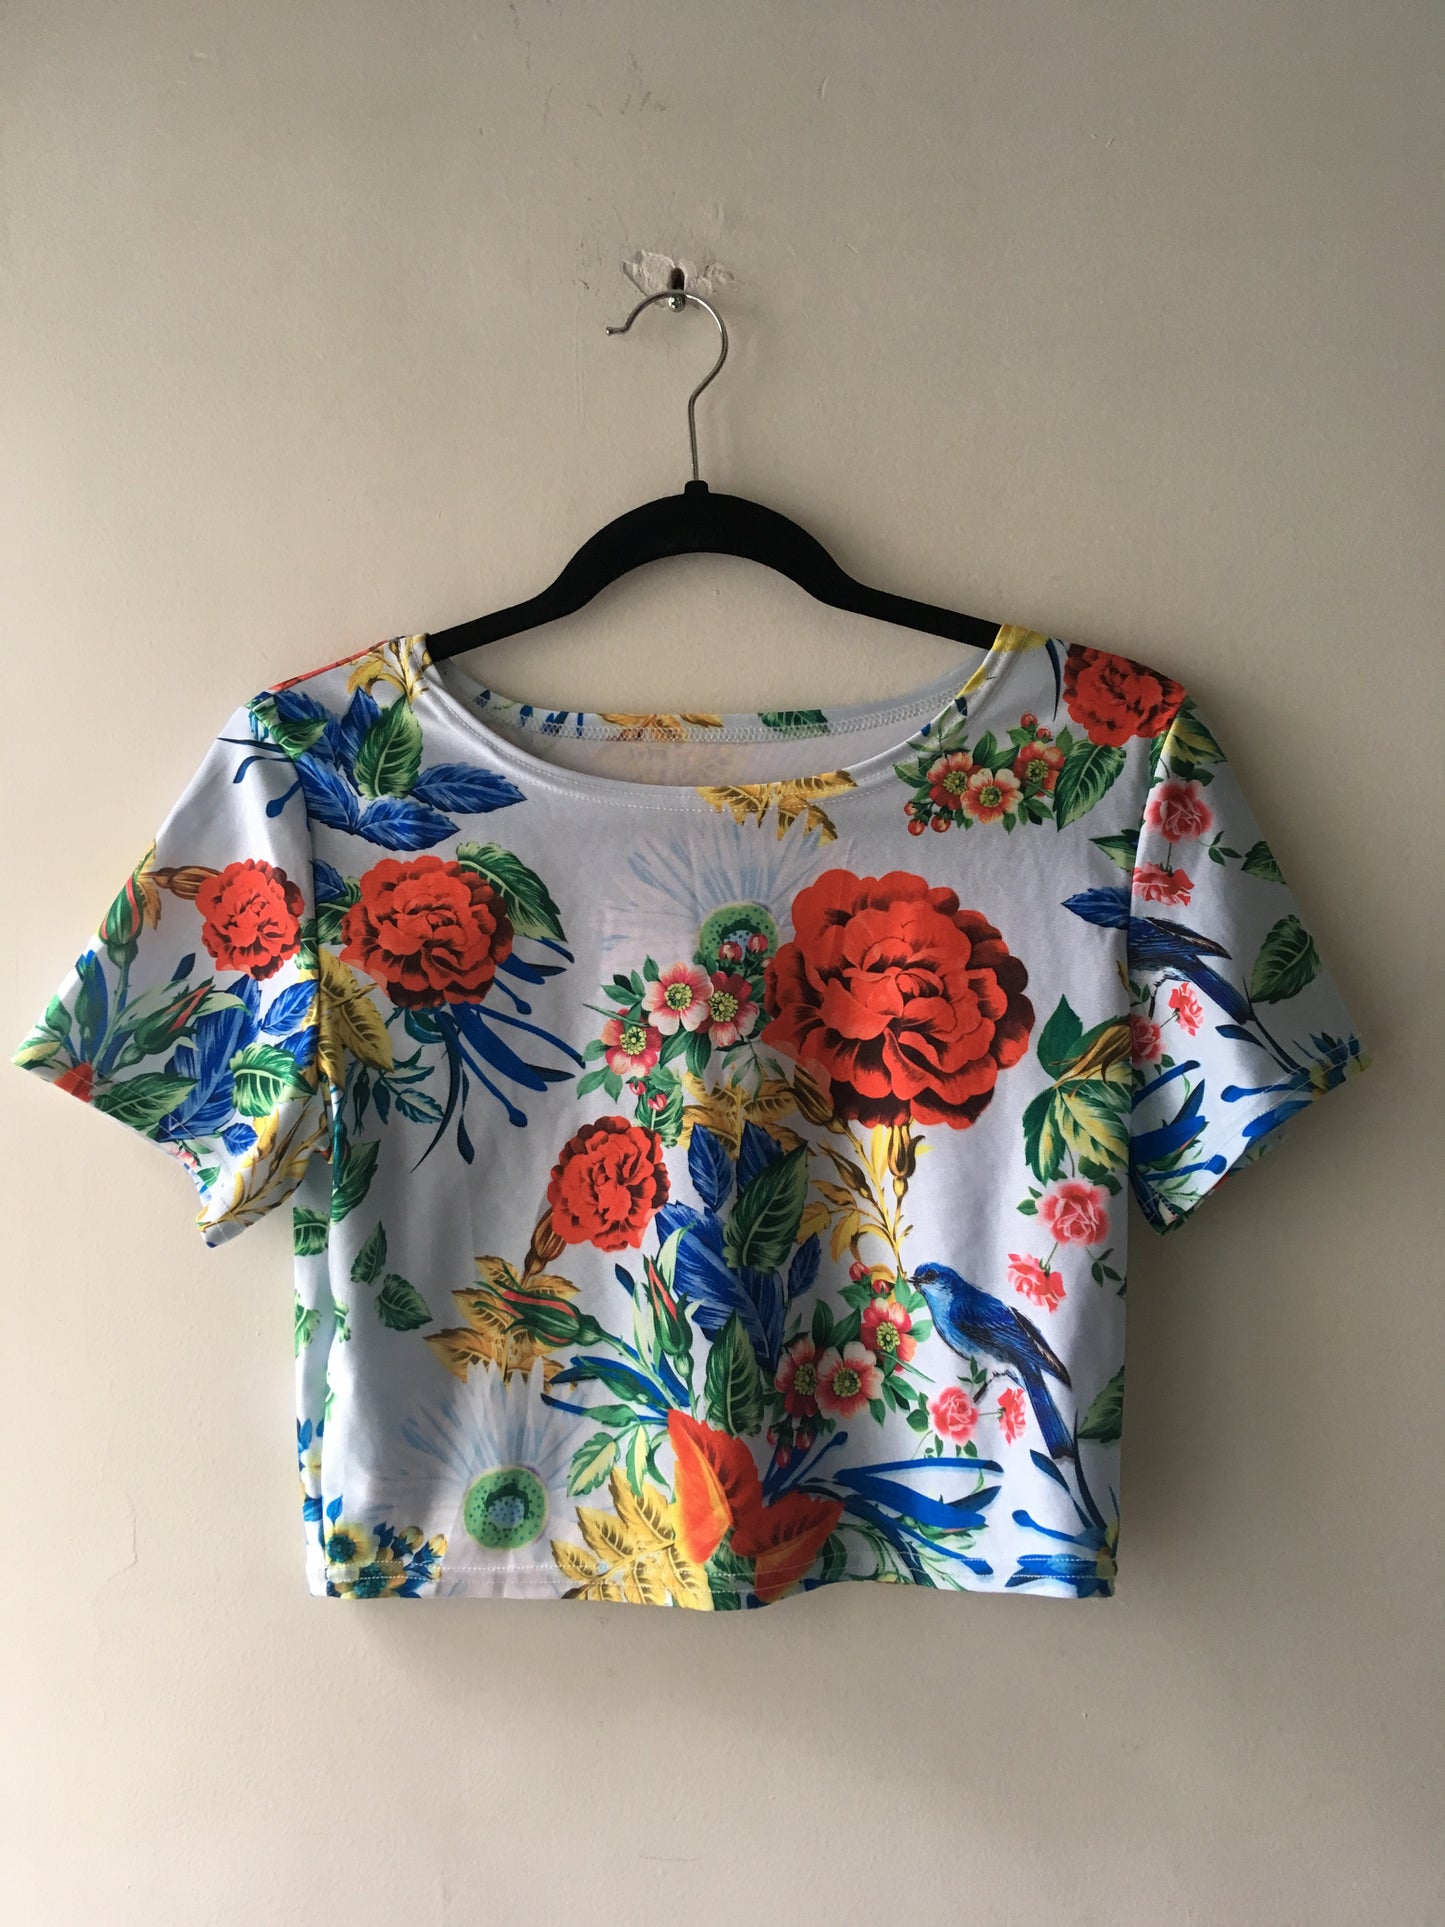 Flowered Top